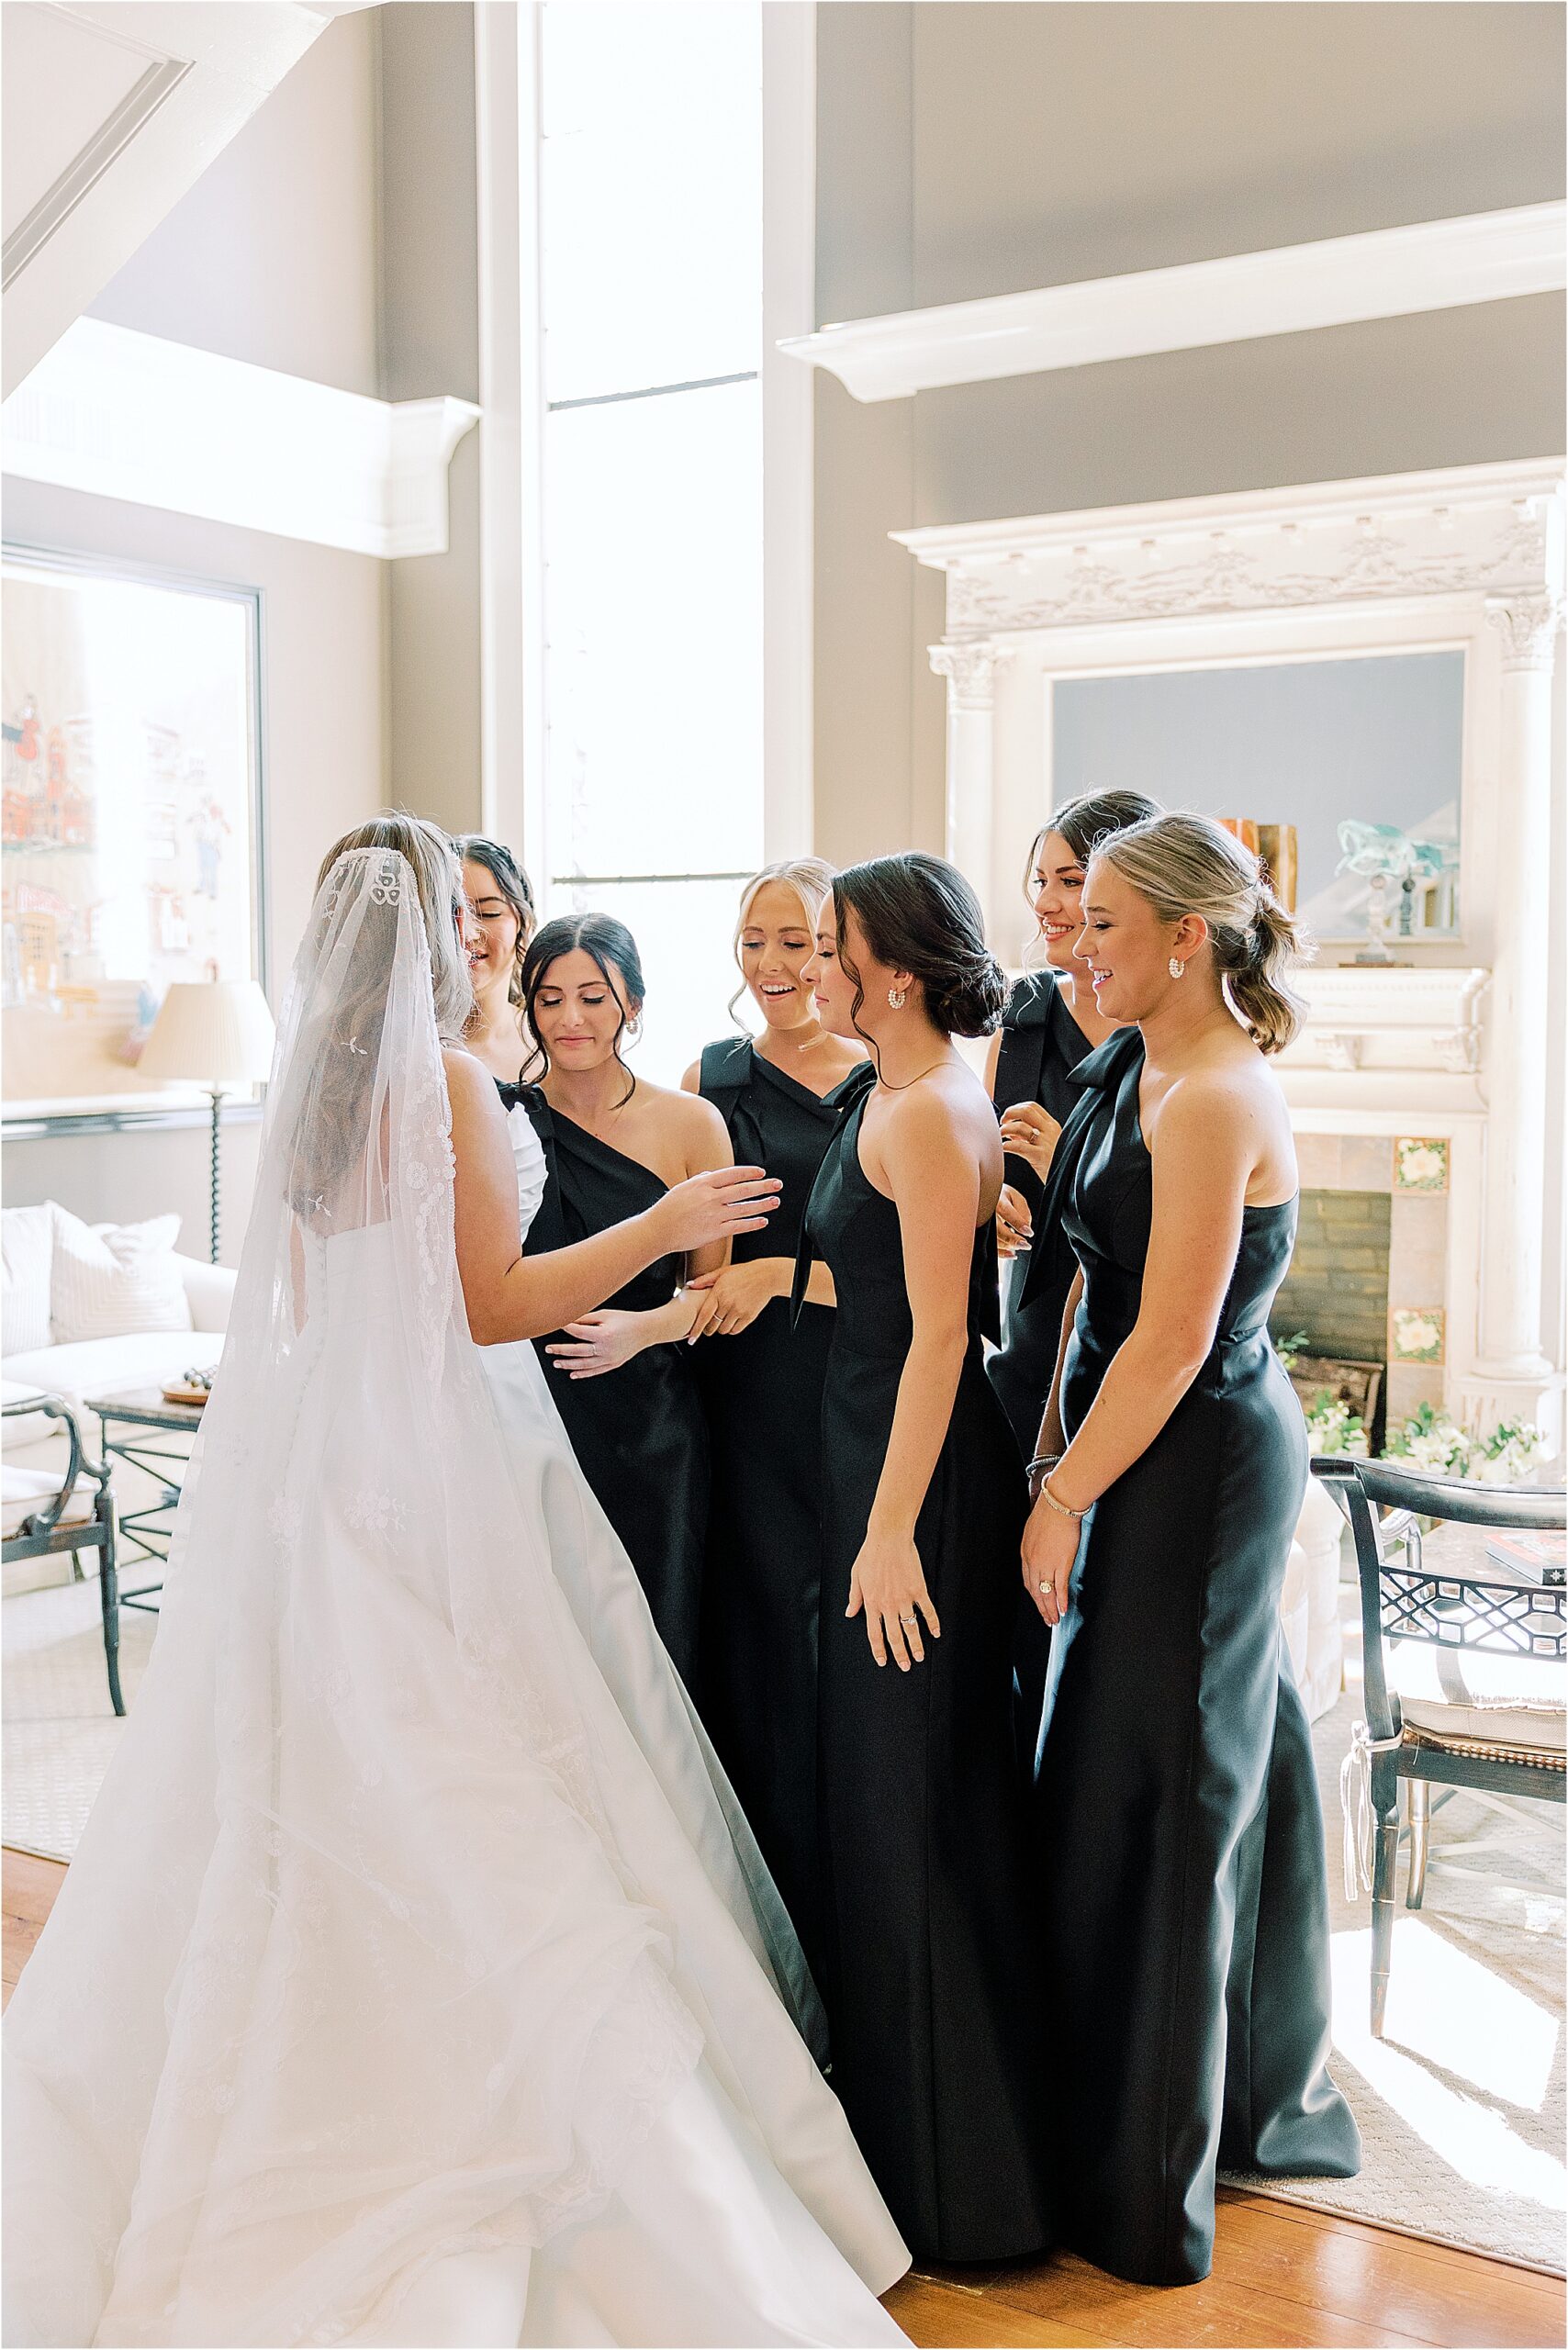 Bridesmaids in black dresses see the bride for the first time, standing in a tan room with big windows. 